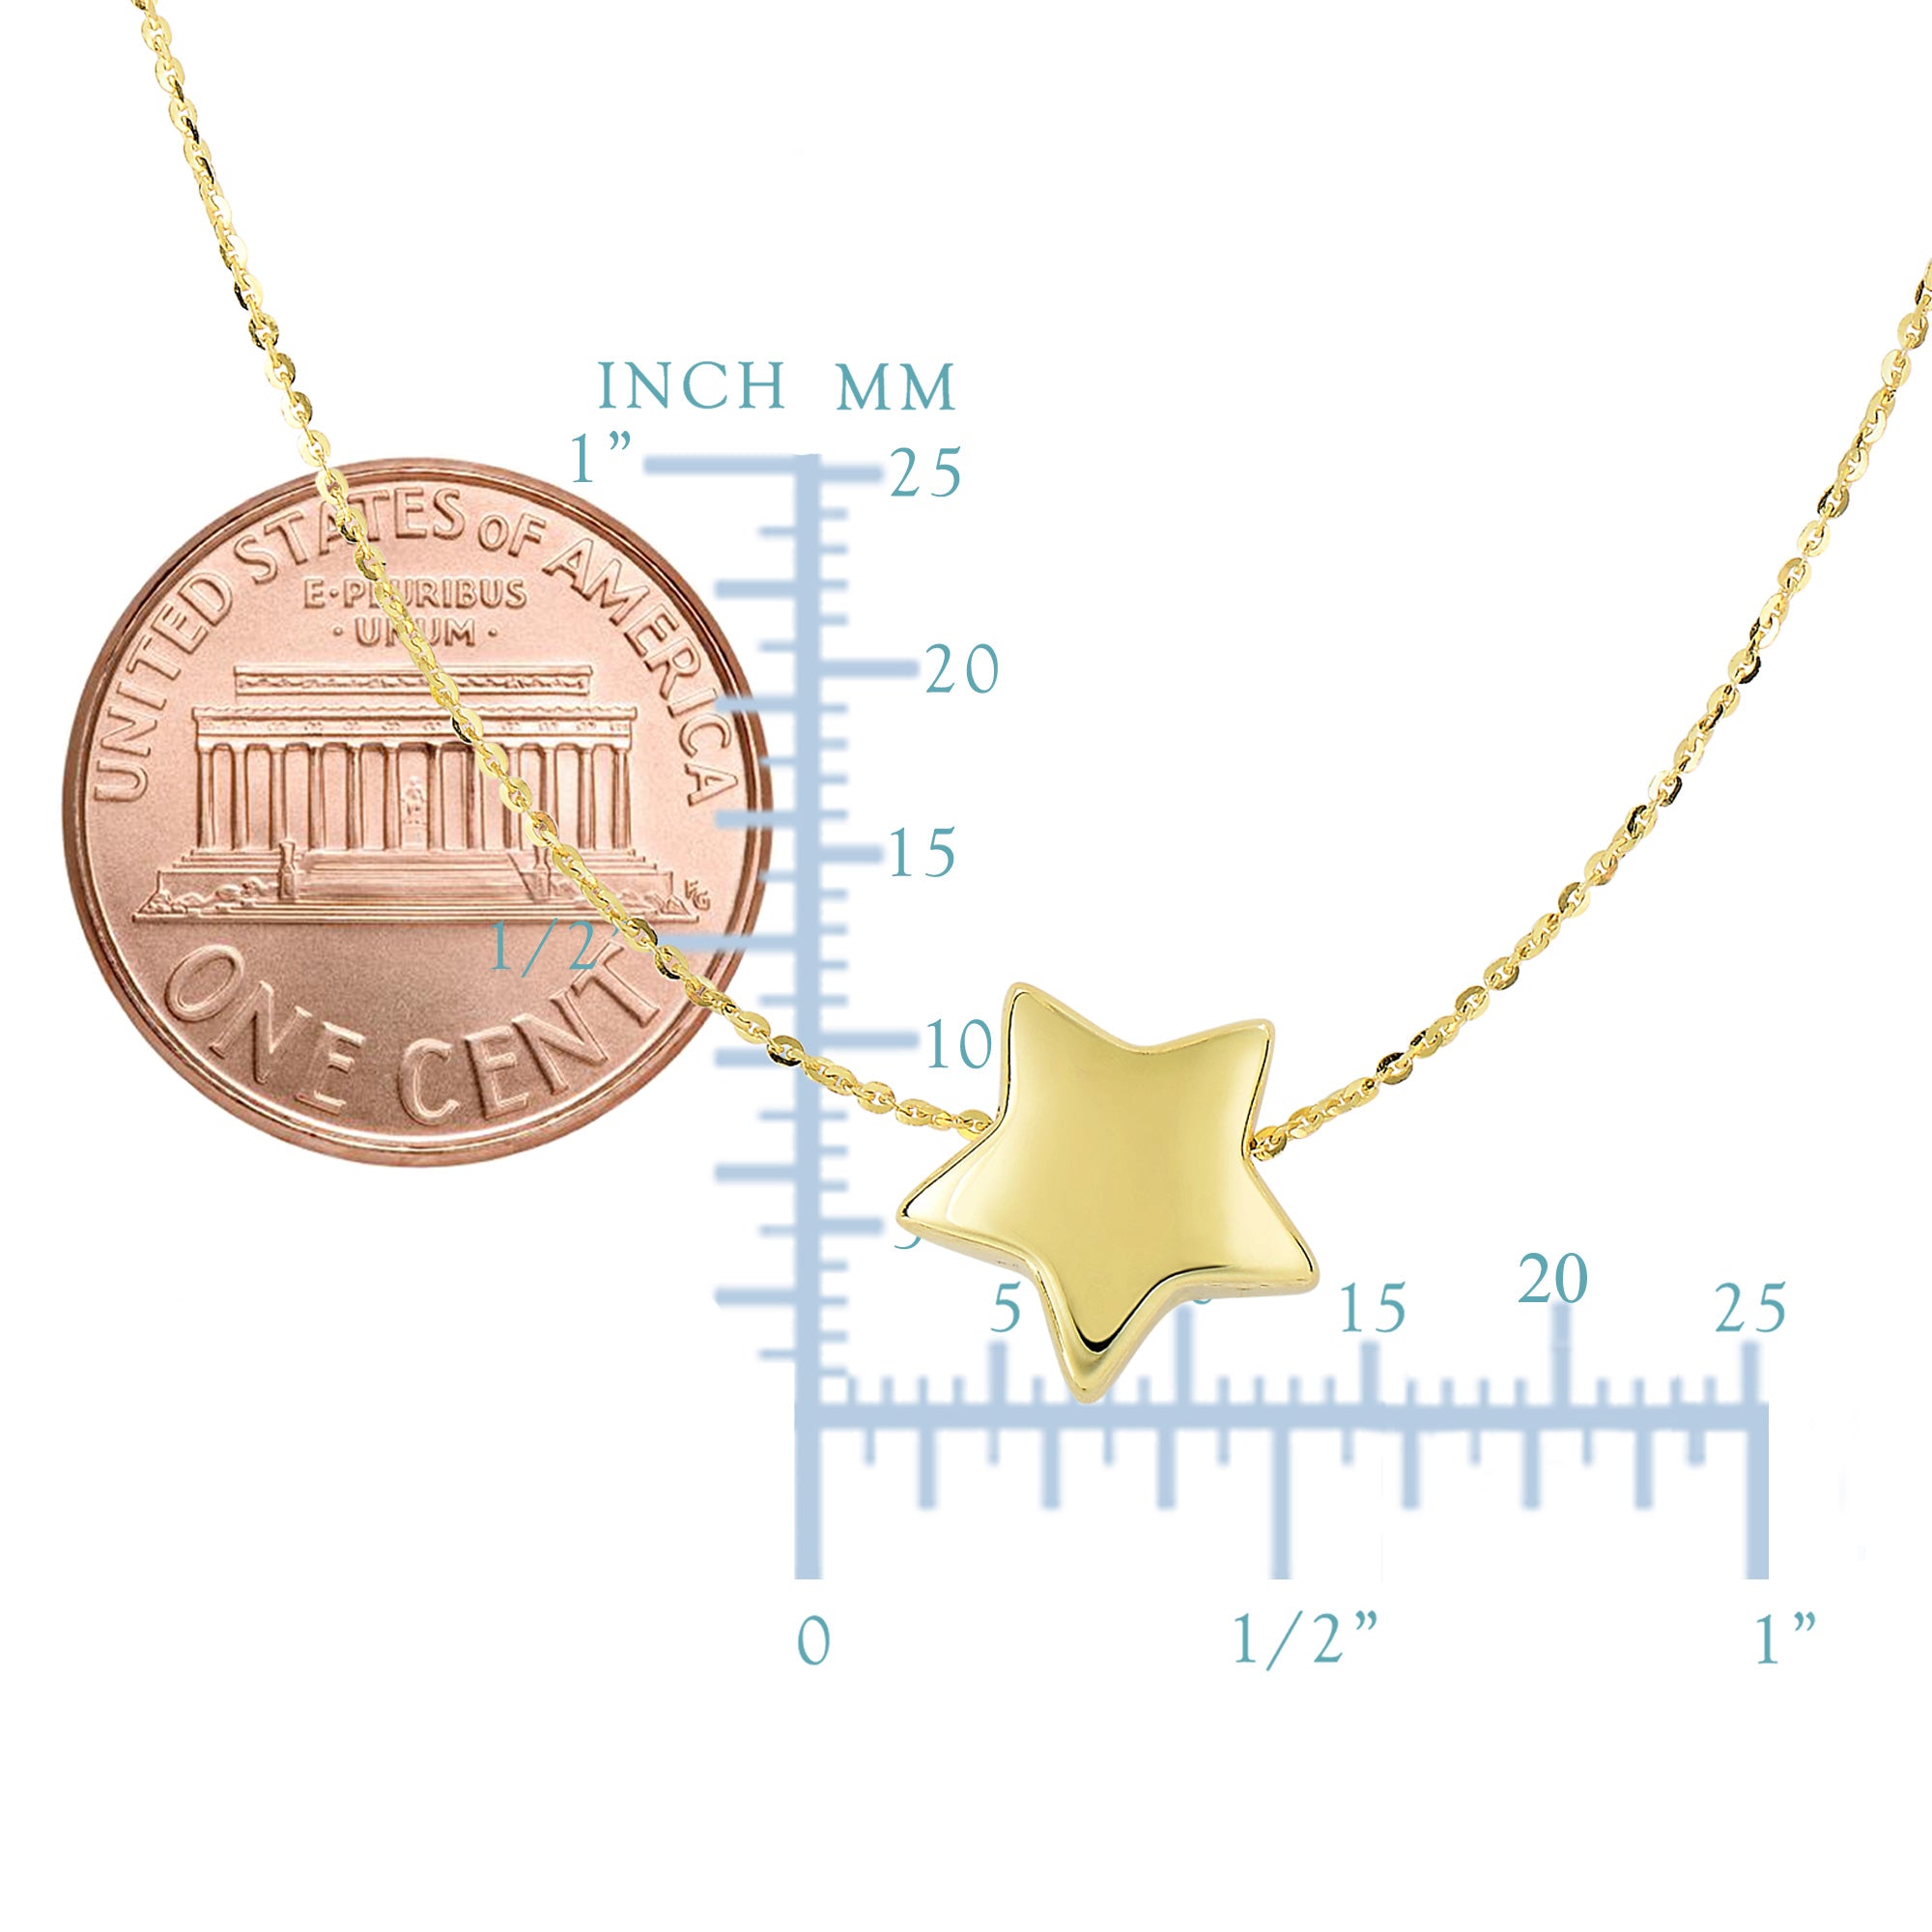 14k Yellow Gold Sliding Puffed Star Pendant Necklace, 18"